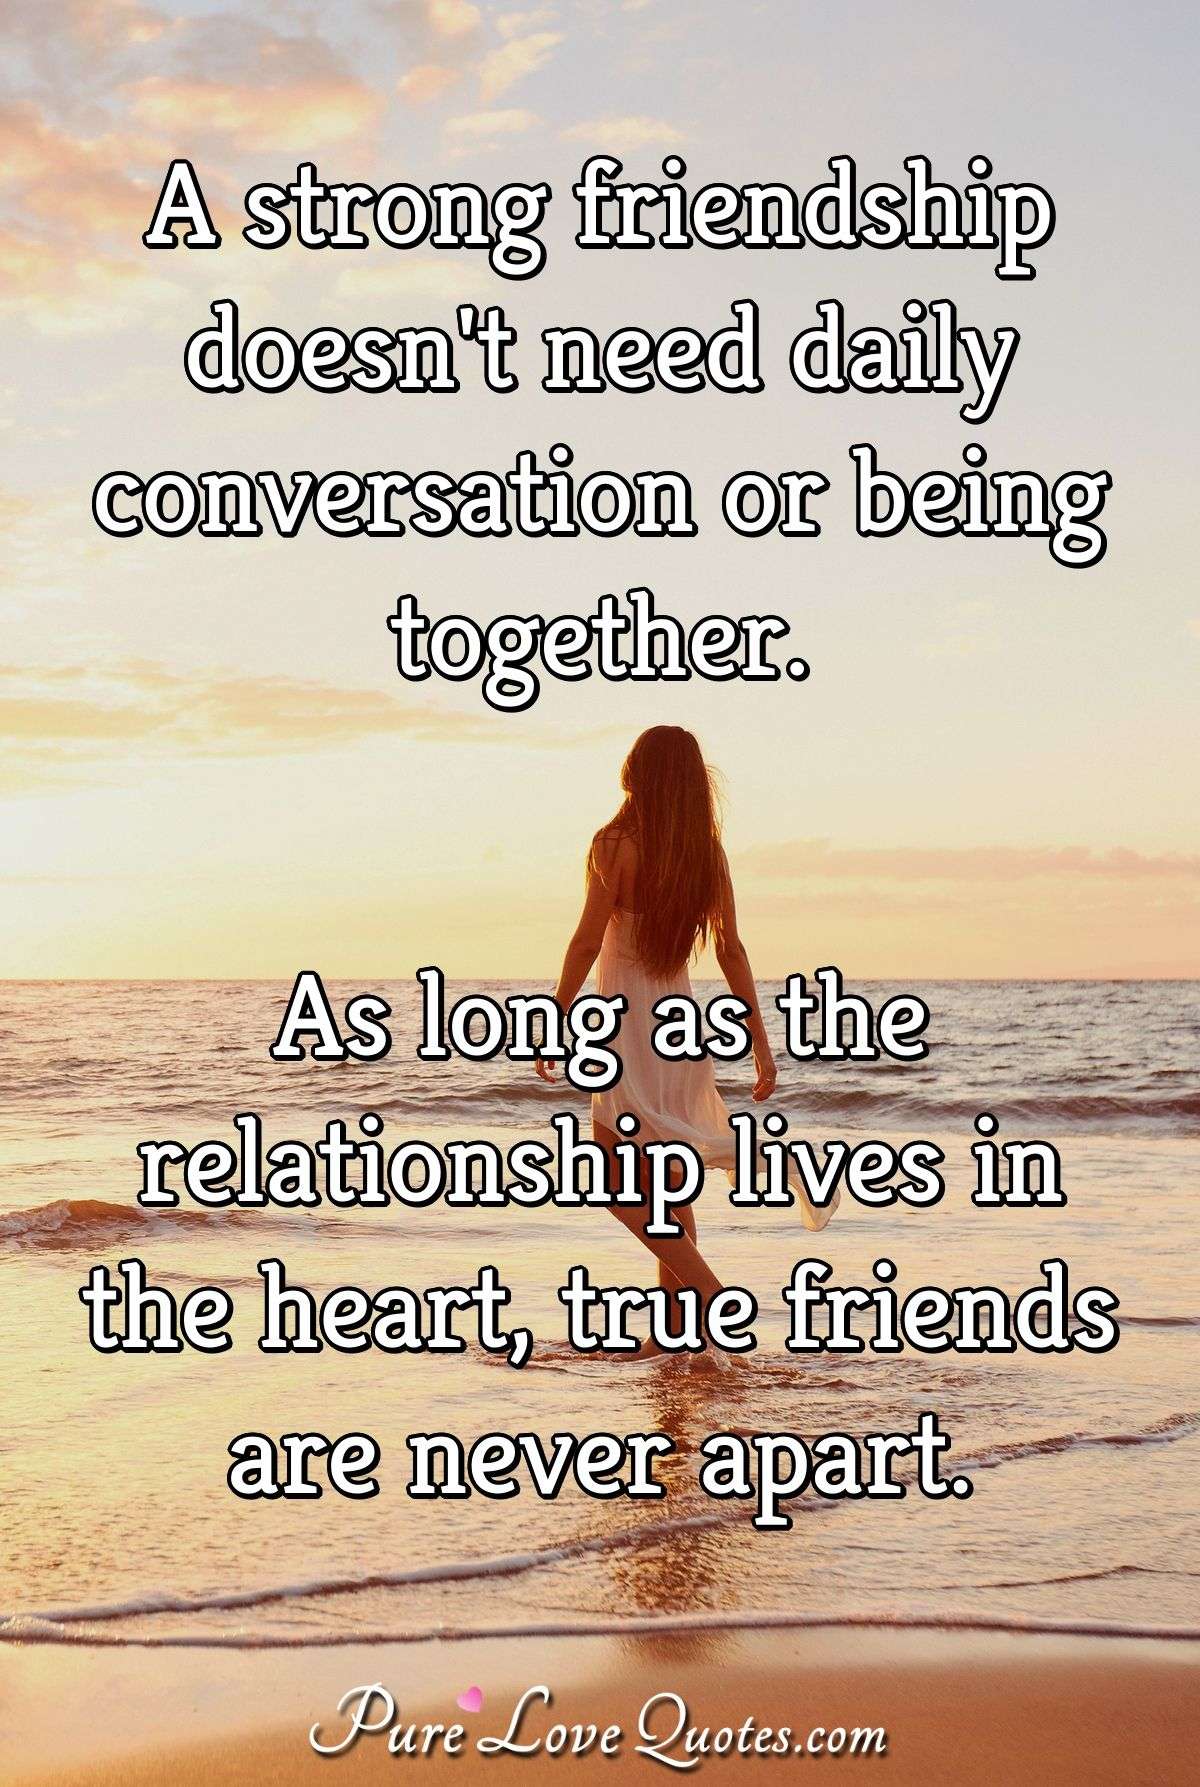 A strong friendship doesn't need daily conversation or being together. As long ... | PureLoveQuotes